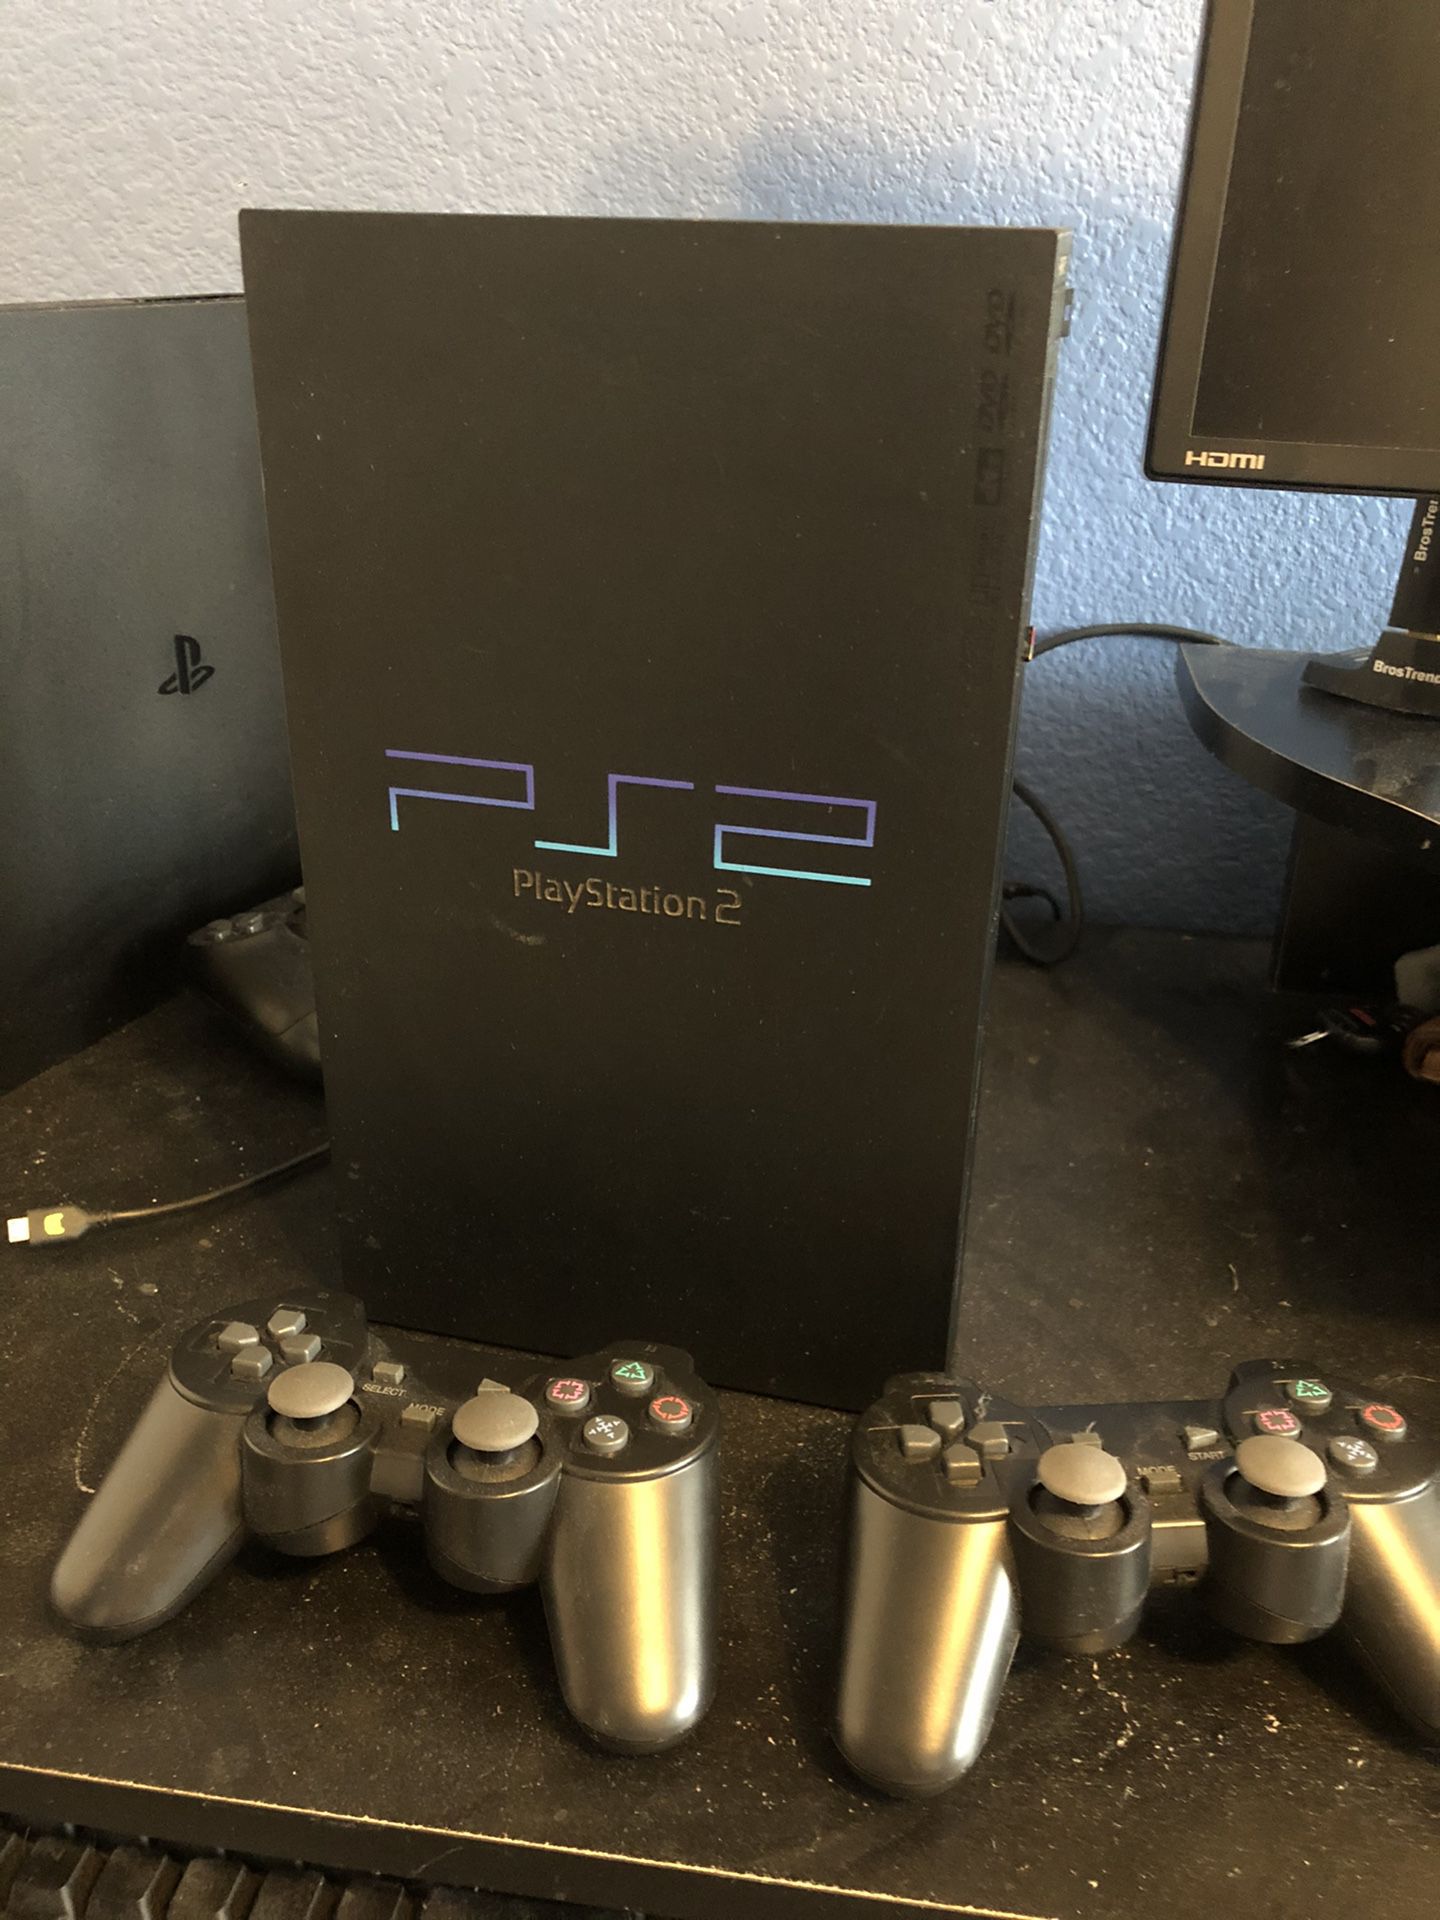 PS2 Good Condition w/ Cables, 2 Controllers, 2 Memory Cards